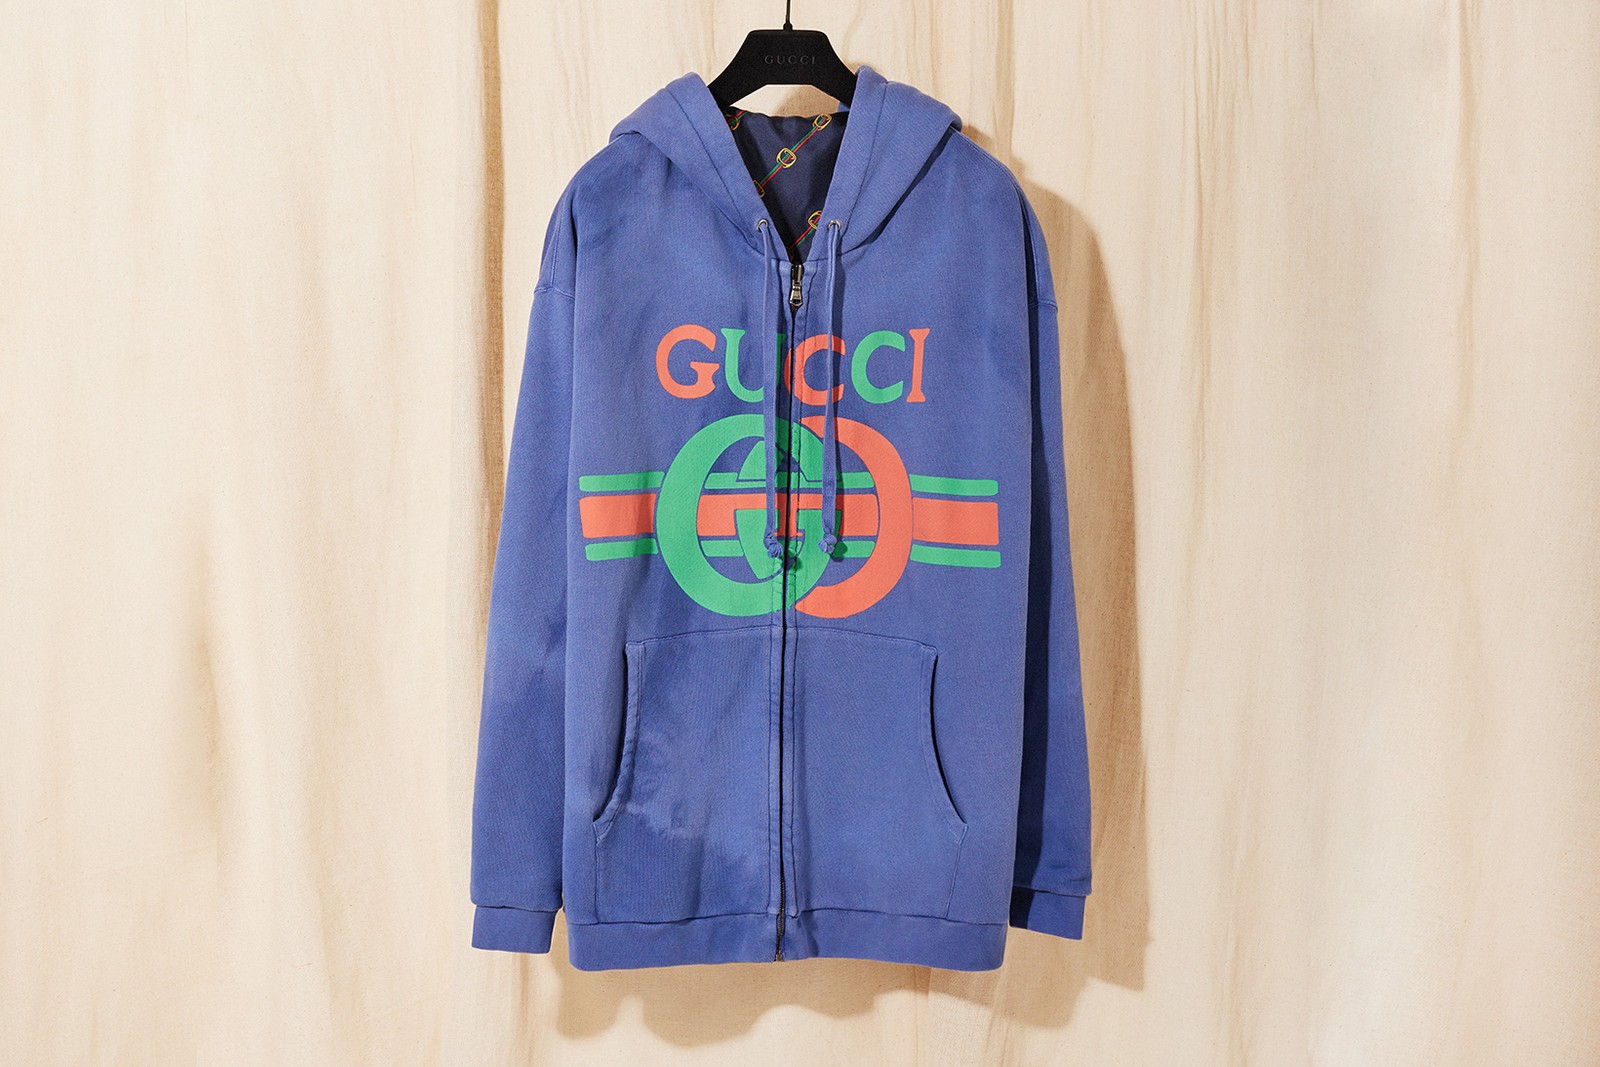 Gucci: here is the new Spring/Summer 2019 collection - Wait! Fashion